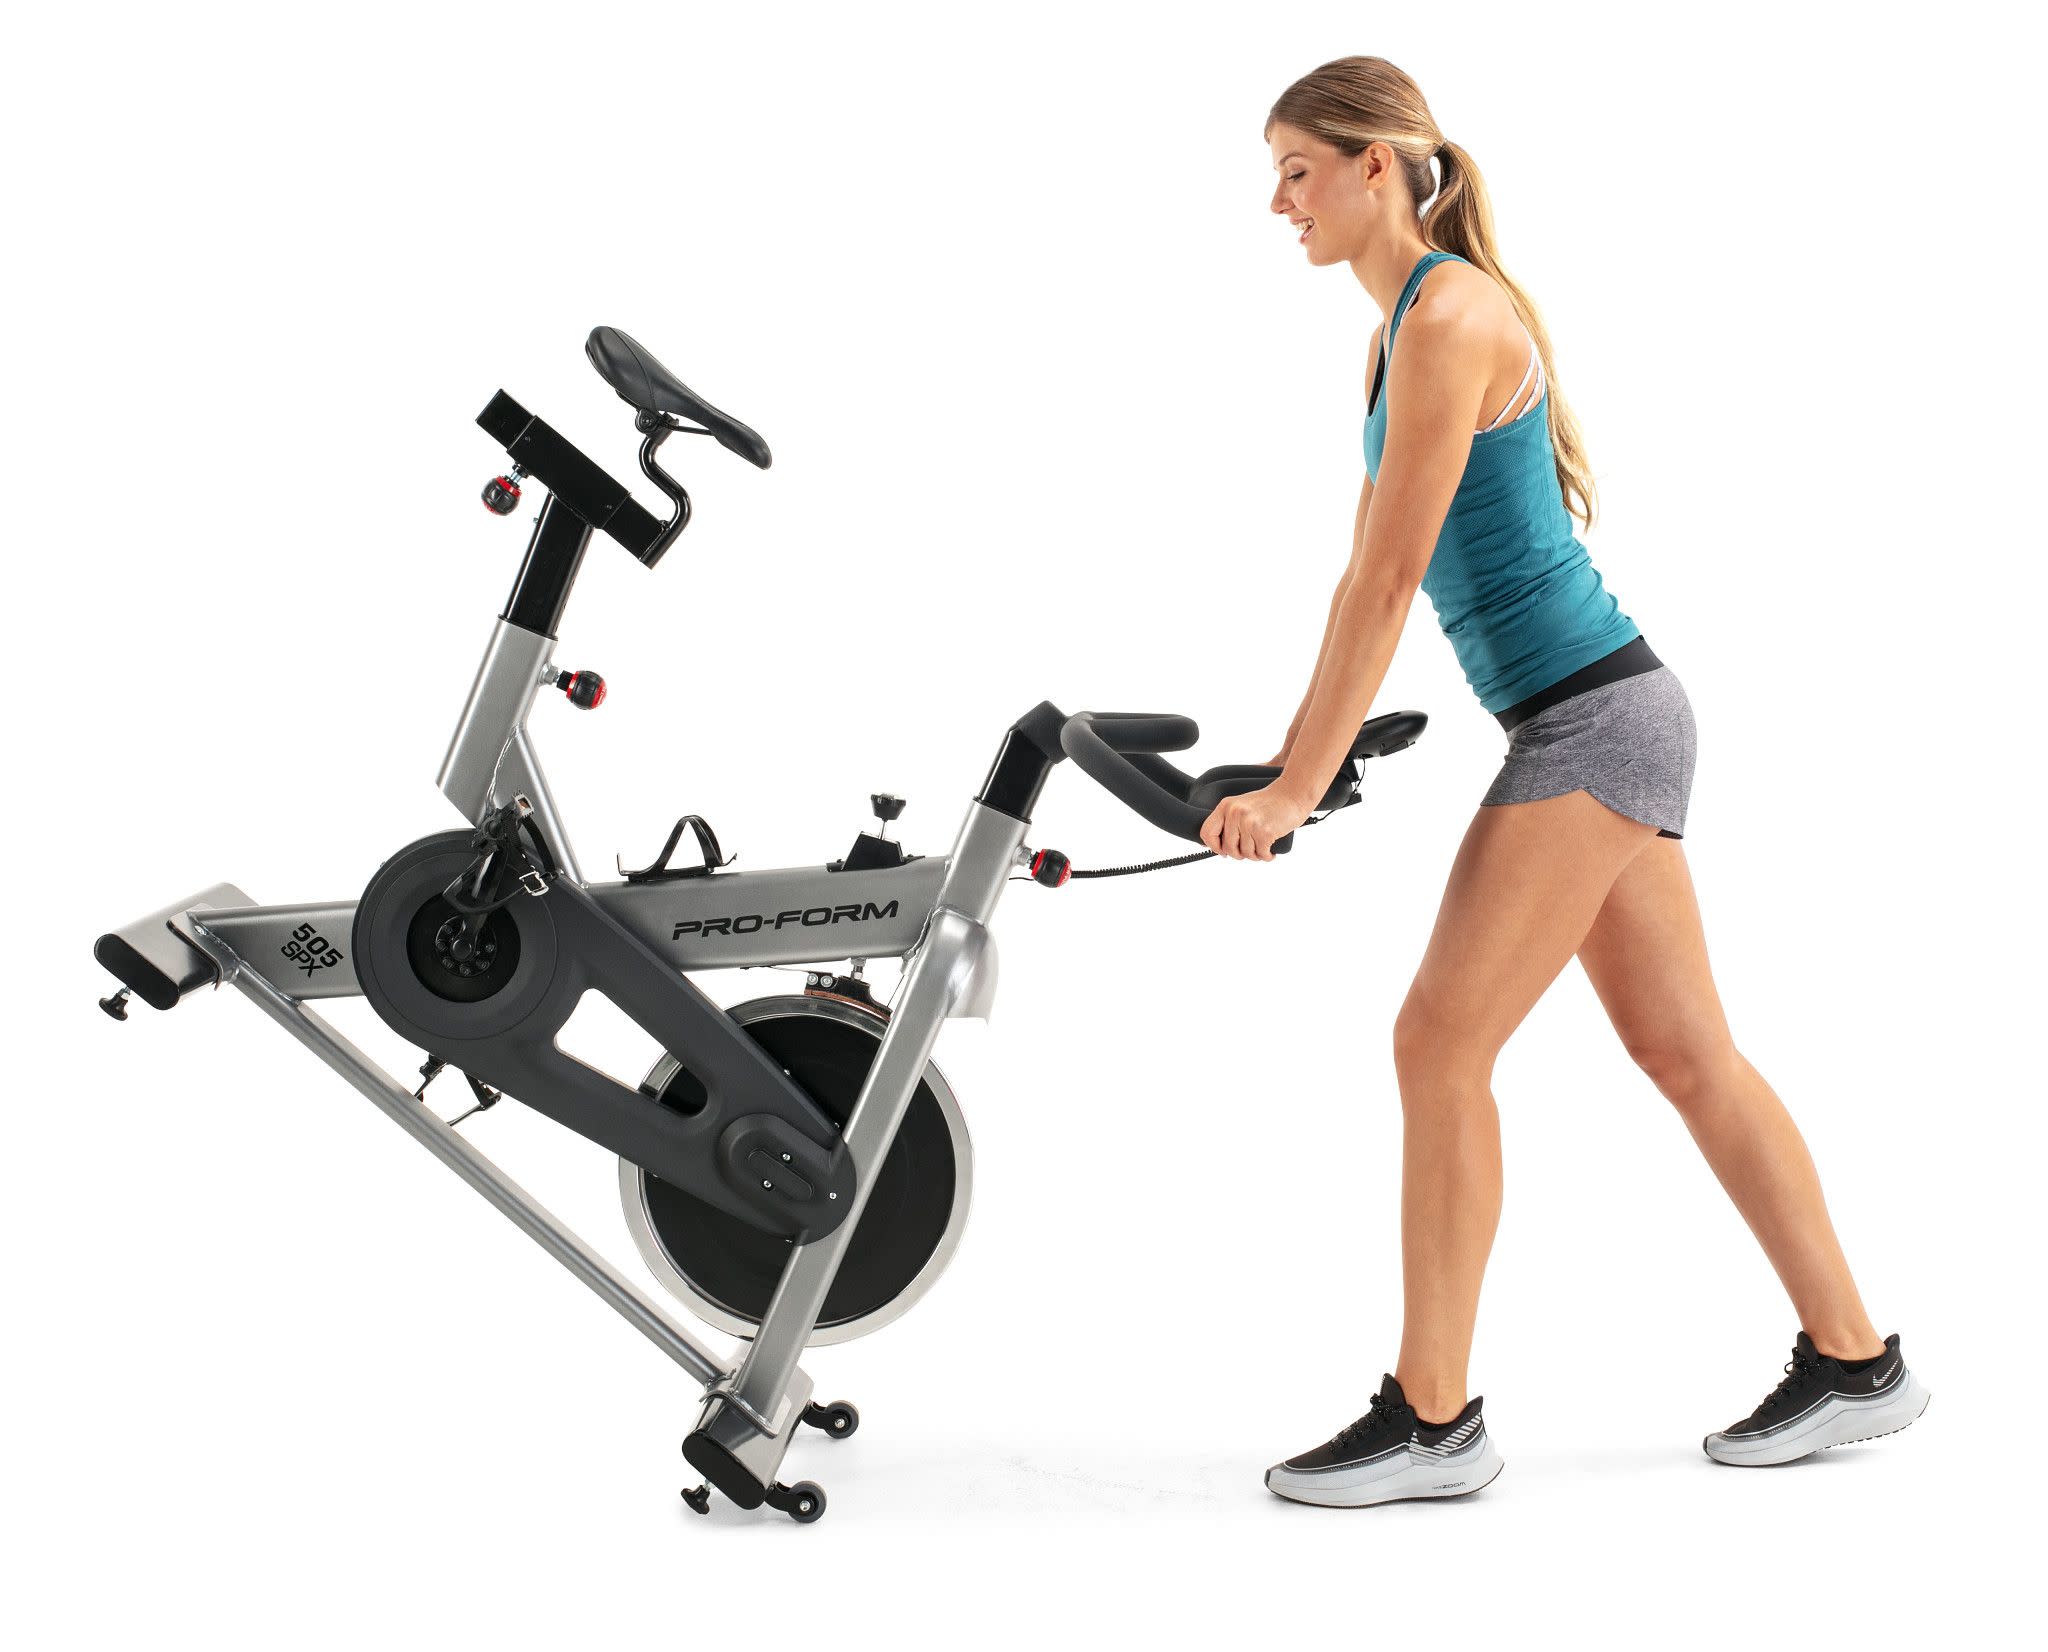 ProForm 505 SPX Indoor Cycle with Quick Manual Resistance Knob, Exercise Bike - image 5 of 9